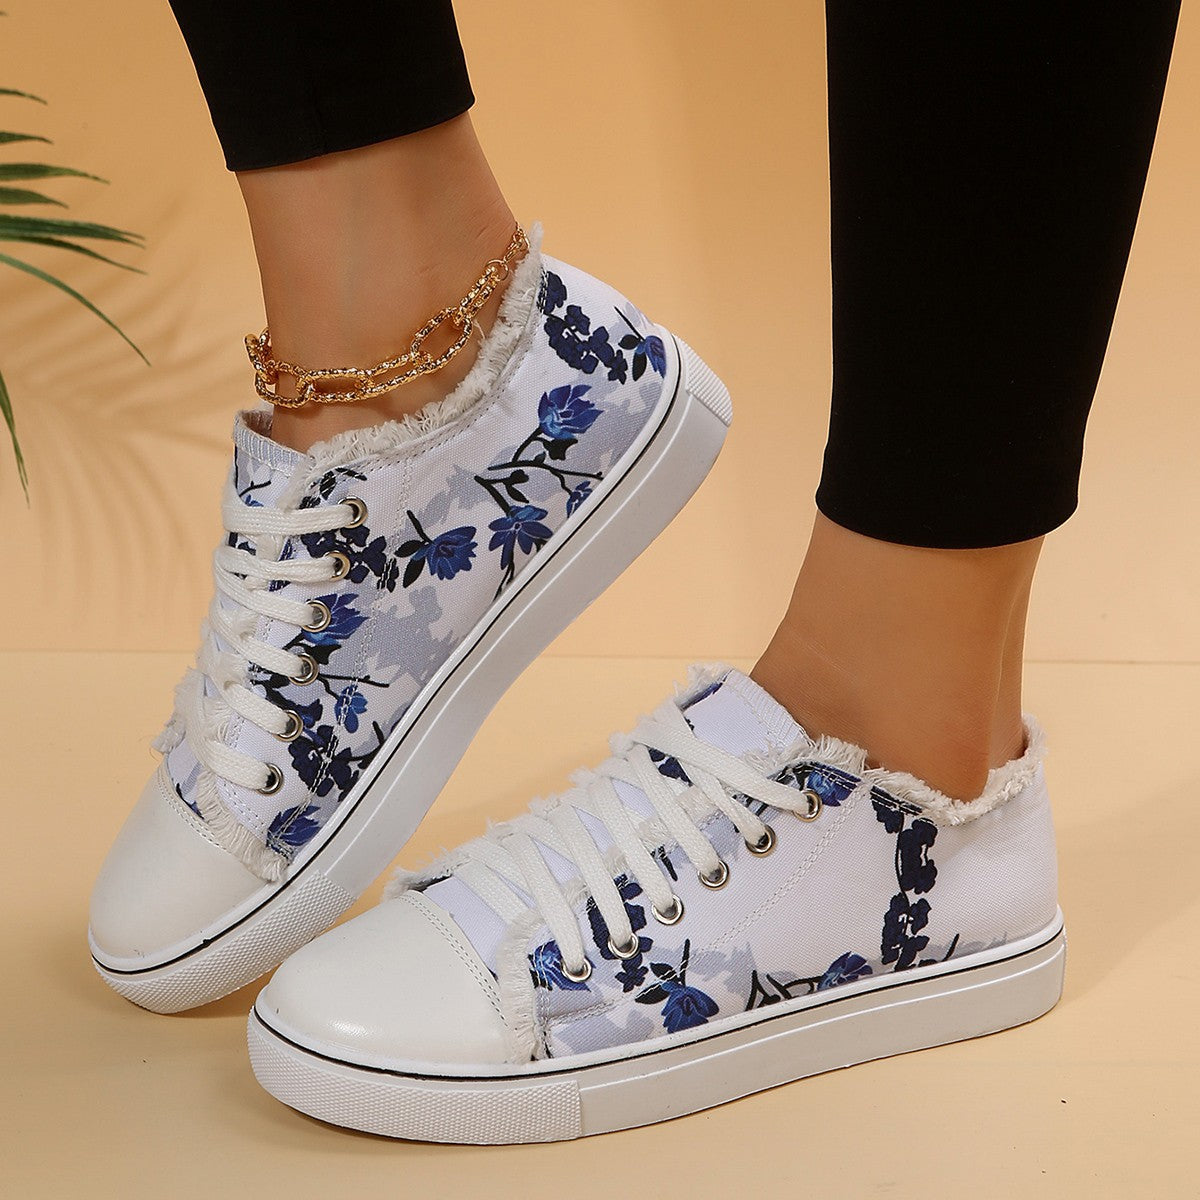 Trainers & Sneakers  | Casual Flat Canvas Shoes Flowers Lace-up Flowers Print Loafers Women Walking Shoes | [option1] |  [option2]| thecurvestory.myshopify.com